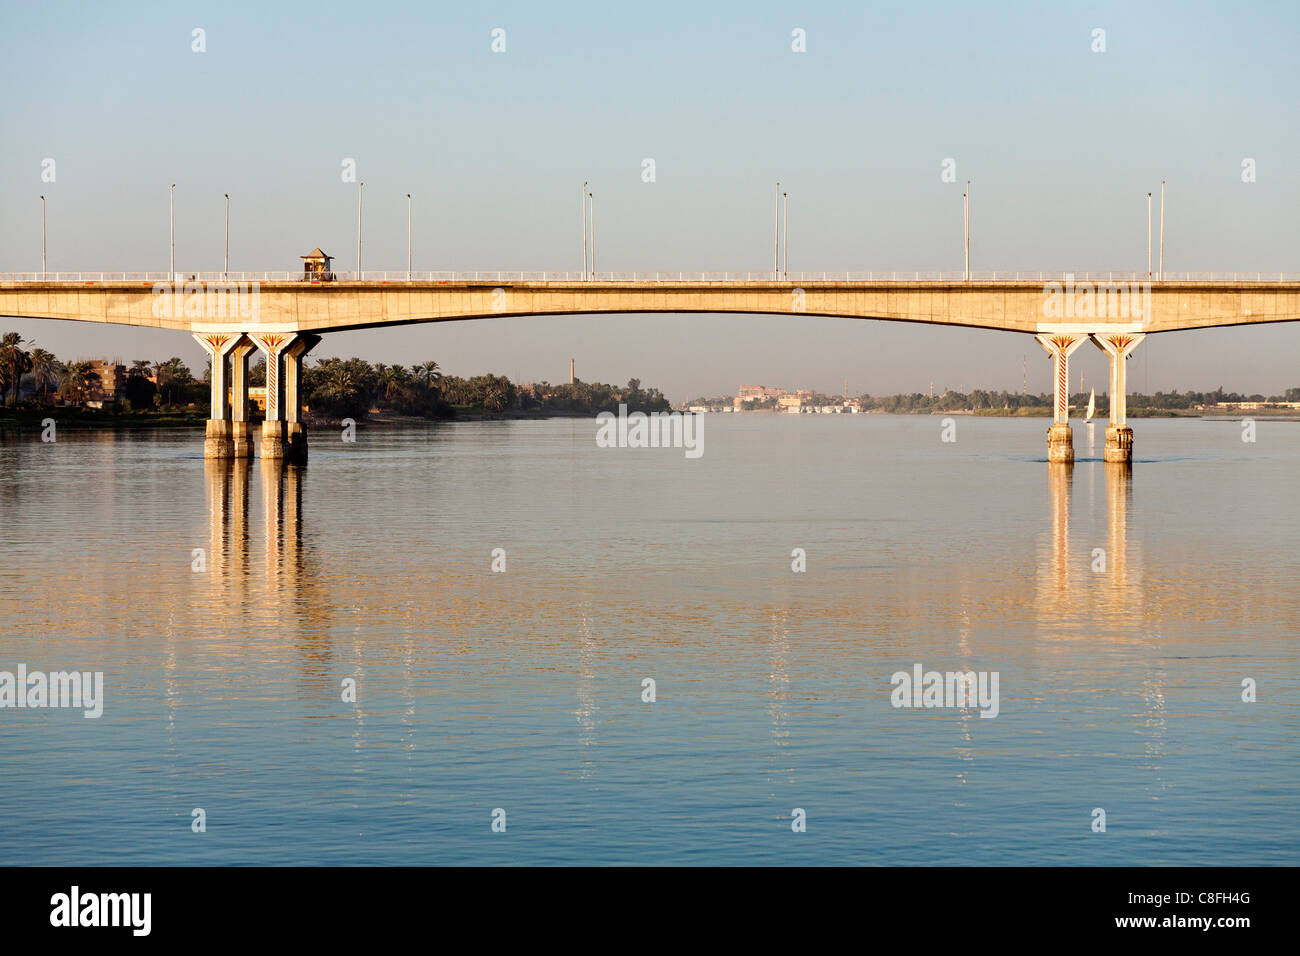 Section of Luxor bridge seen from the middle of the Nile reflected in calm water, Luxor, Egypt, Africa Stock Photo